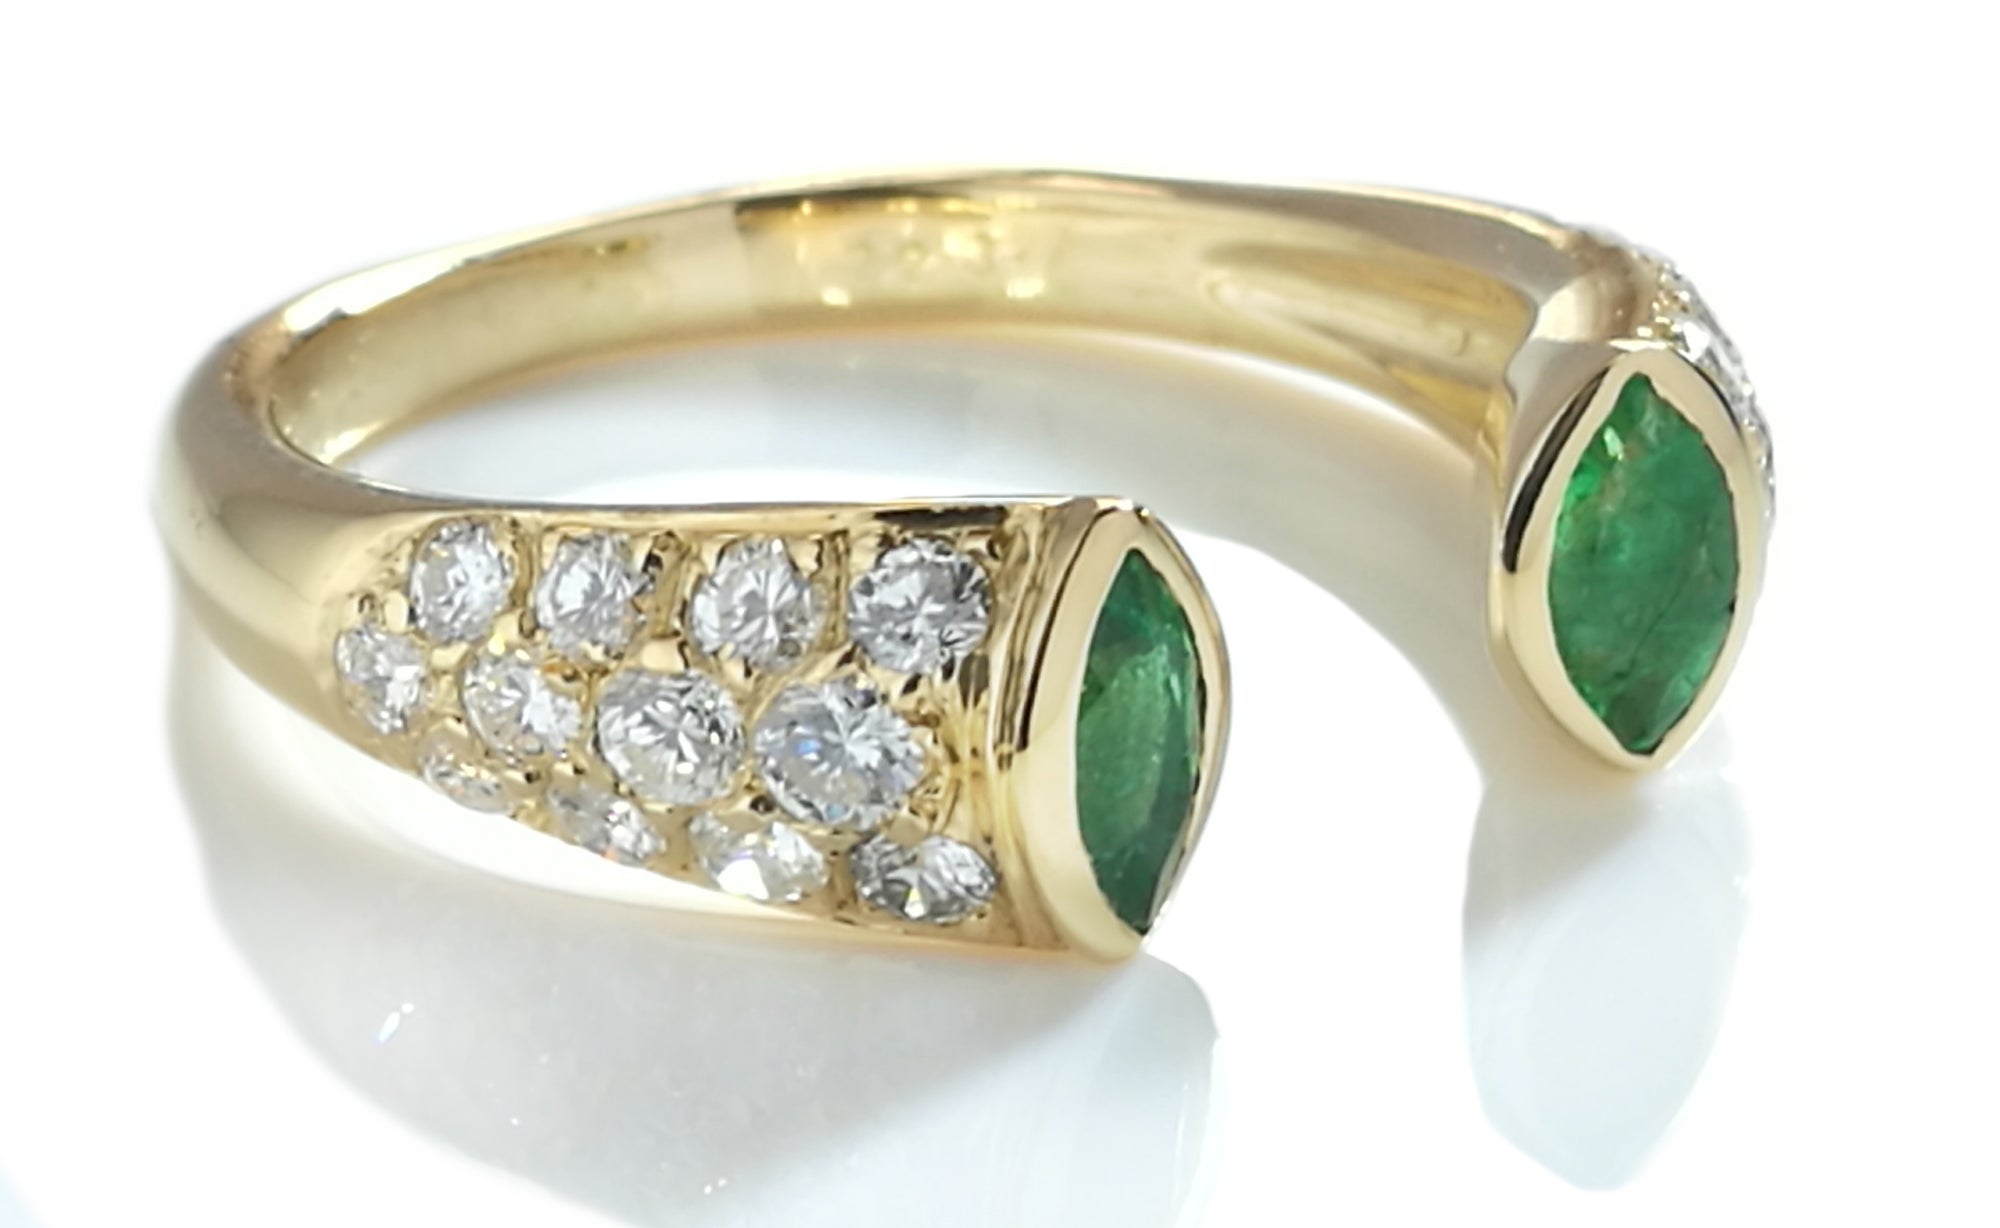 Vintage 1990s Cartier Marquise Cut Emerald, Diamond Pave & 18k Gold Open Ring